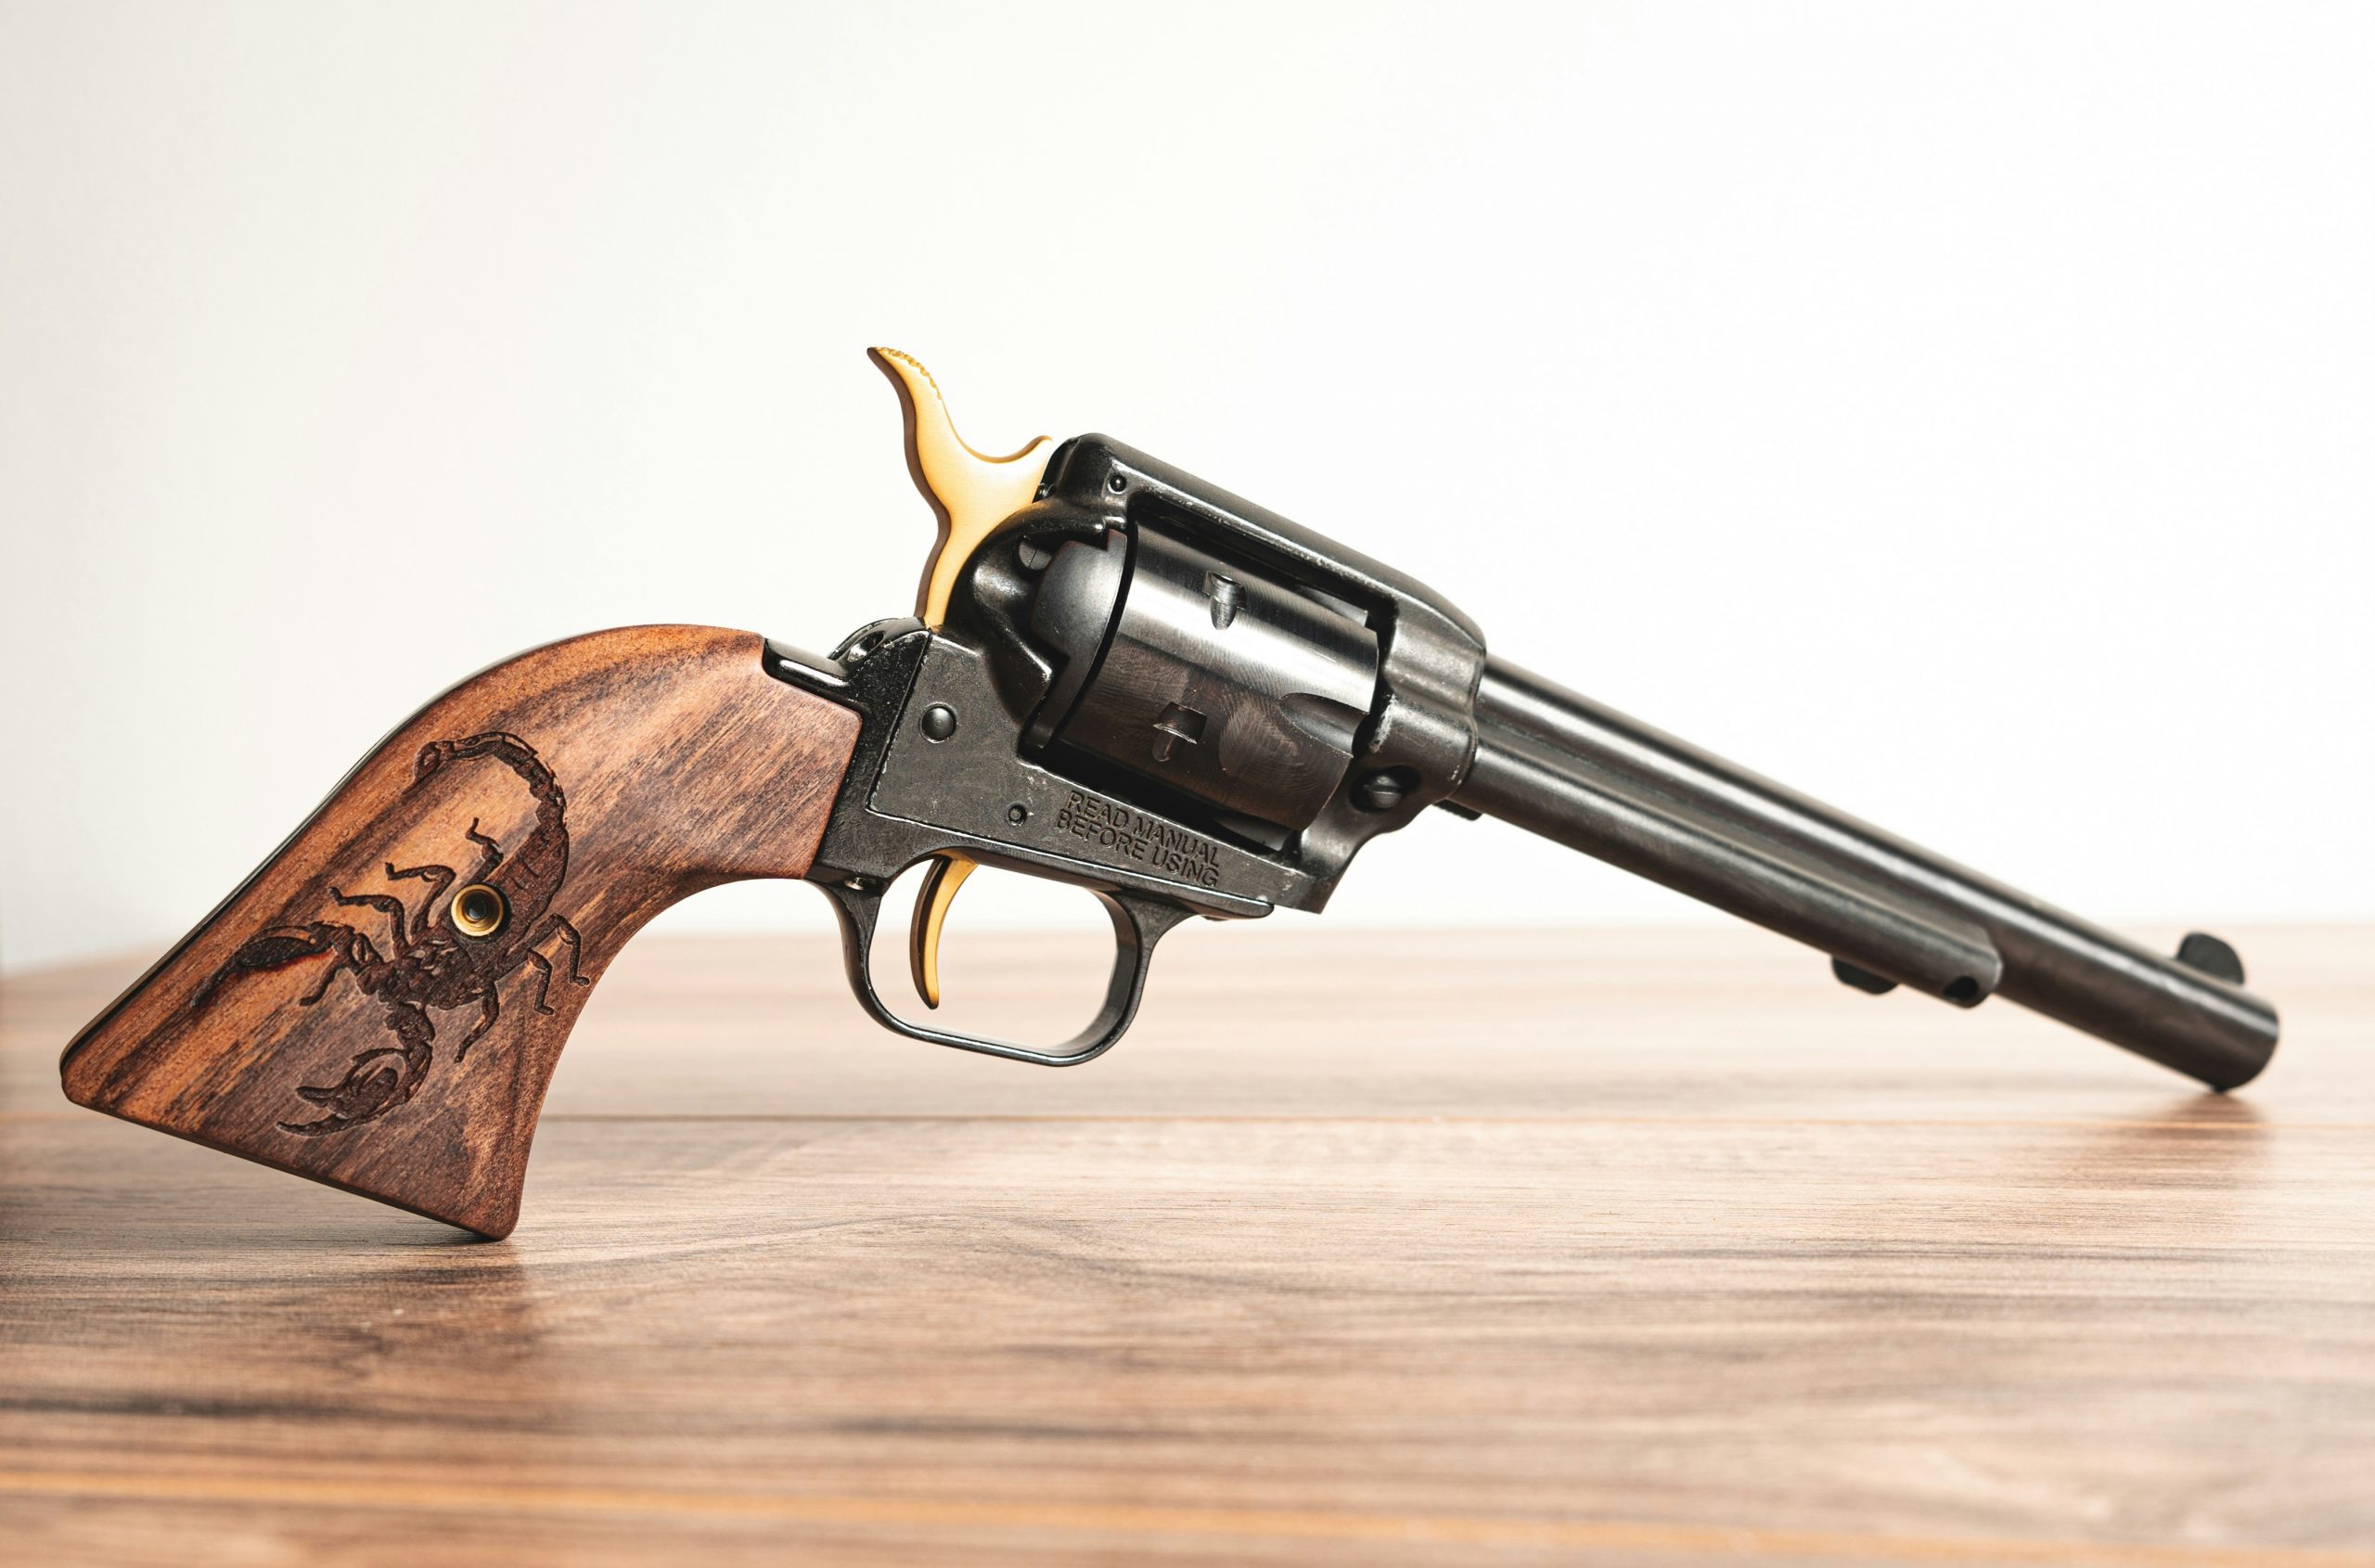 A revolver is balanced on its handle and barrel on a wood surface. The handle is wooden with a scorpion burnished into the wood. The rest of the gun is gray metal.